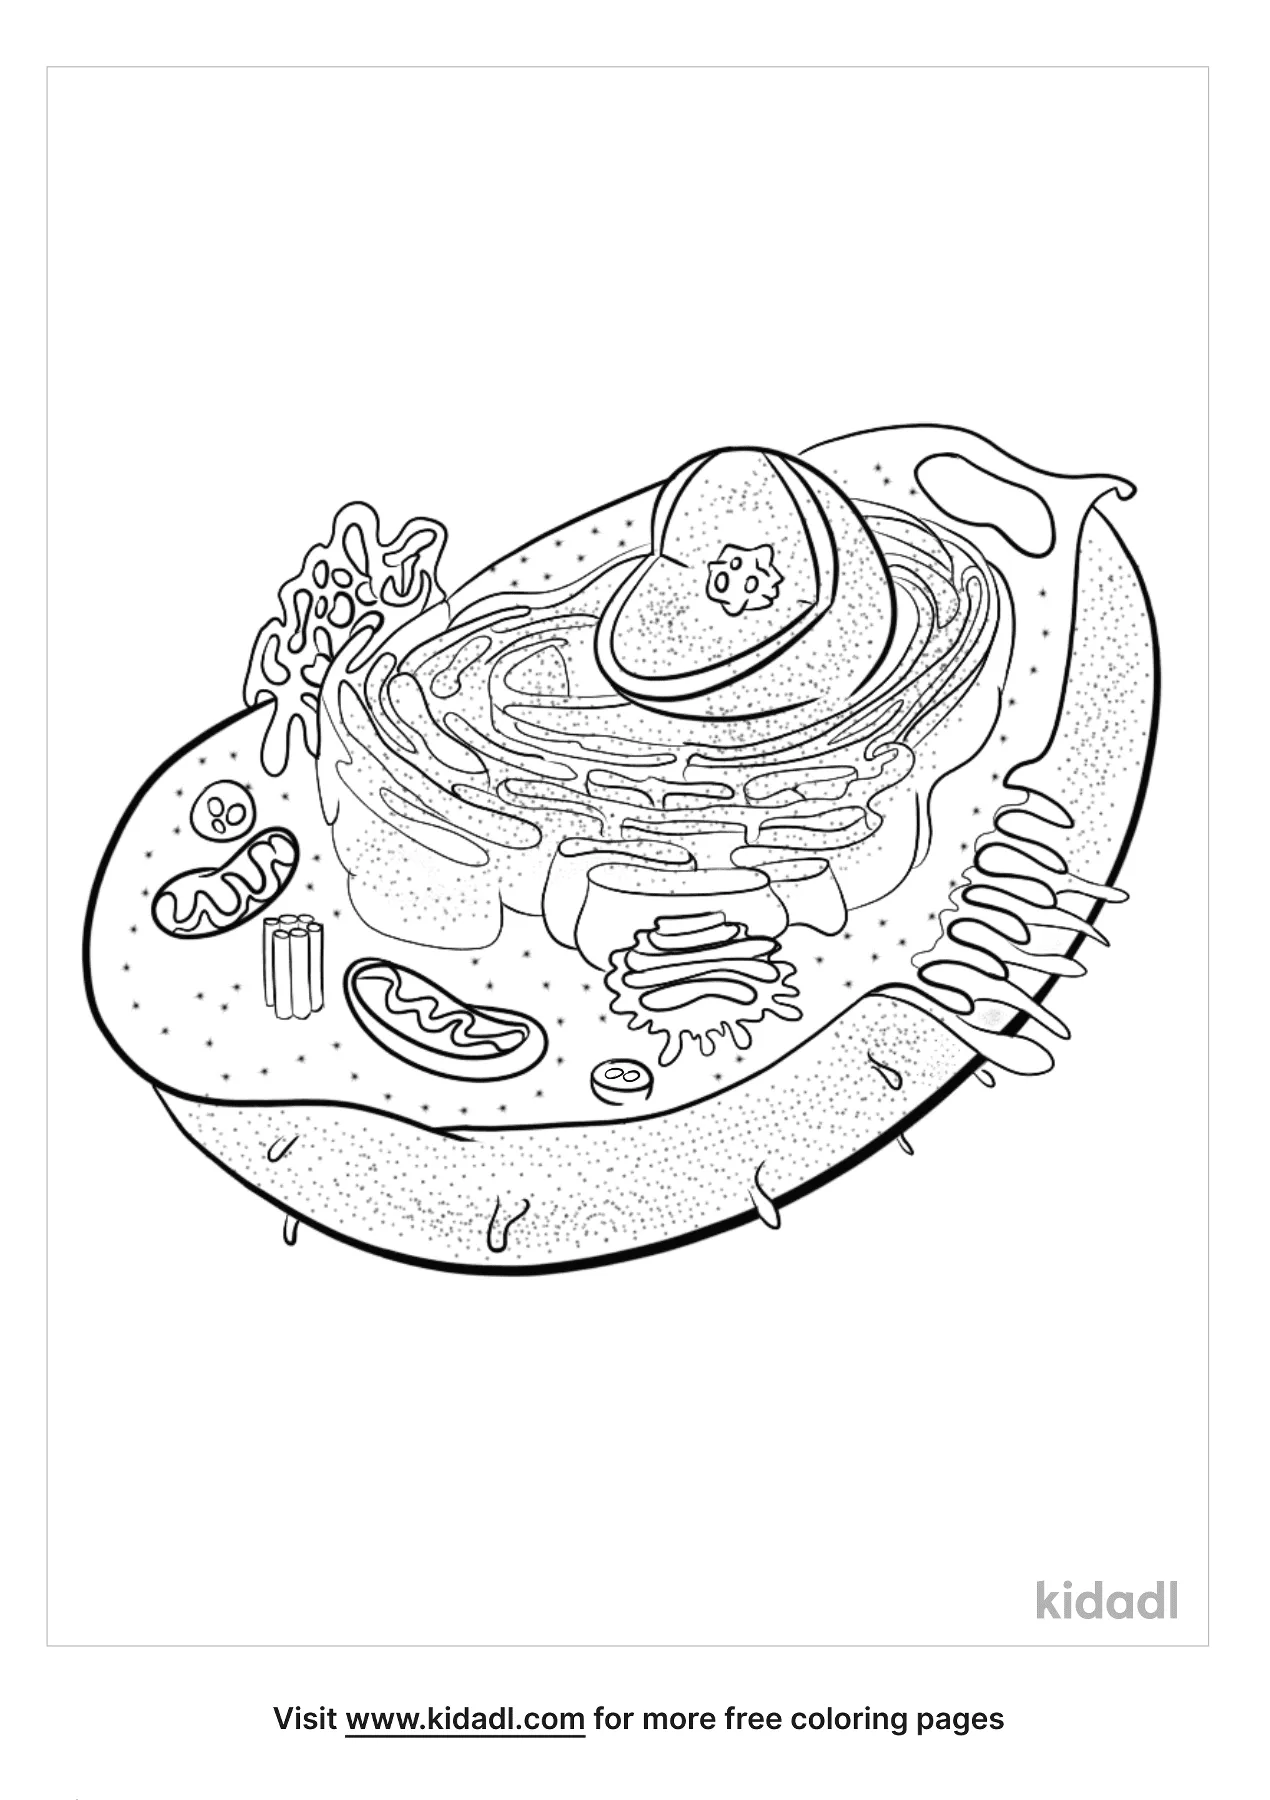 Free Animal Cell Coloring Page | Coloring Page Printables | Kidadl